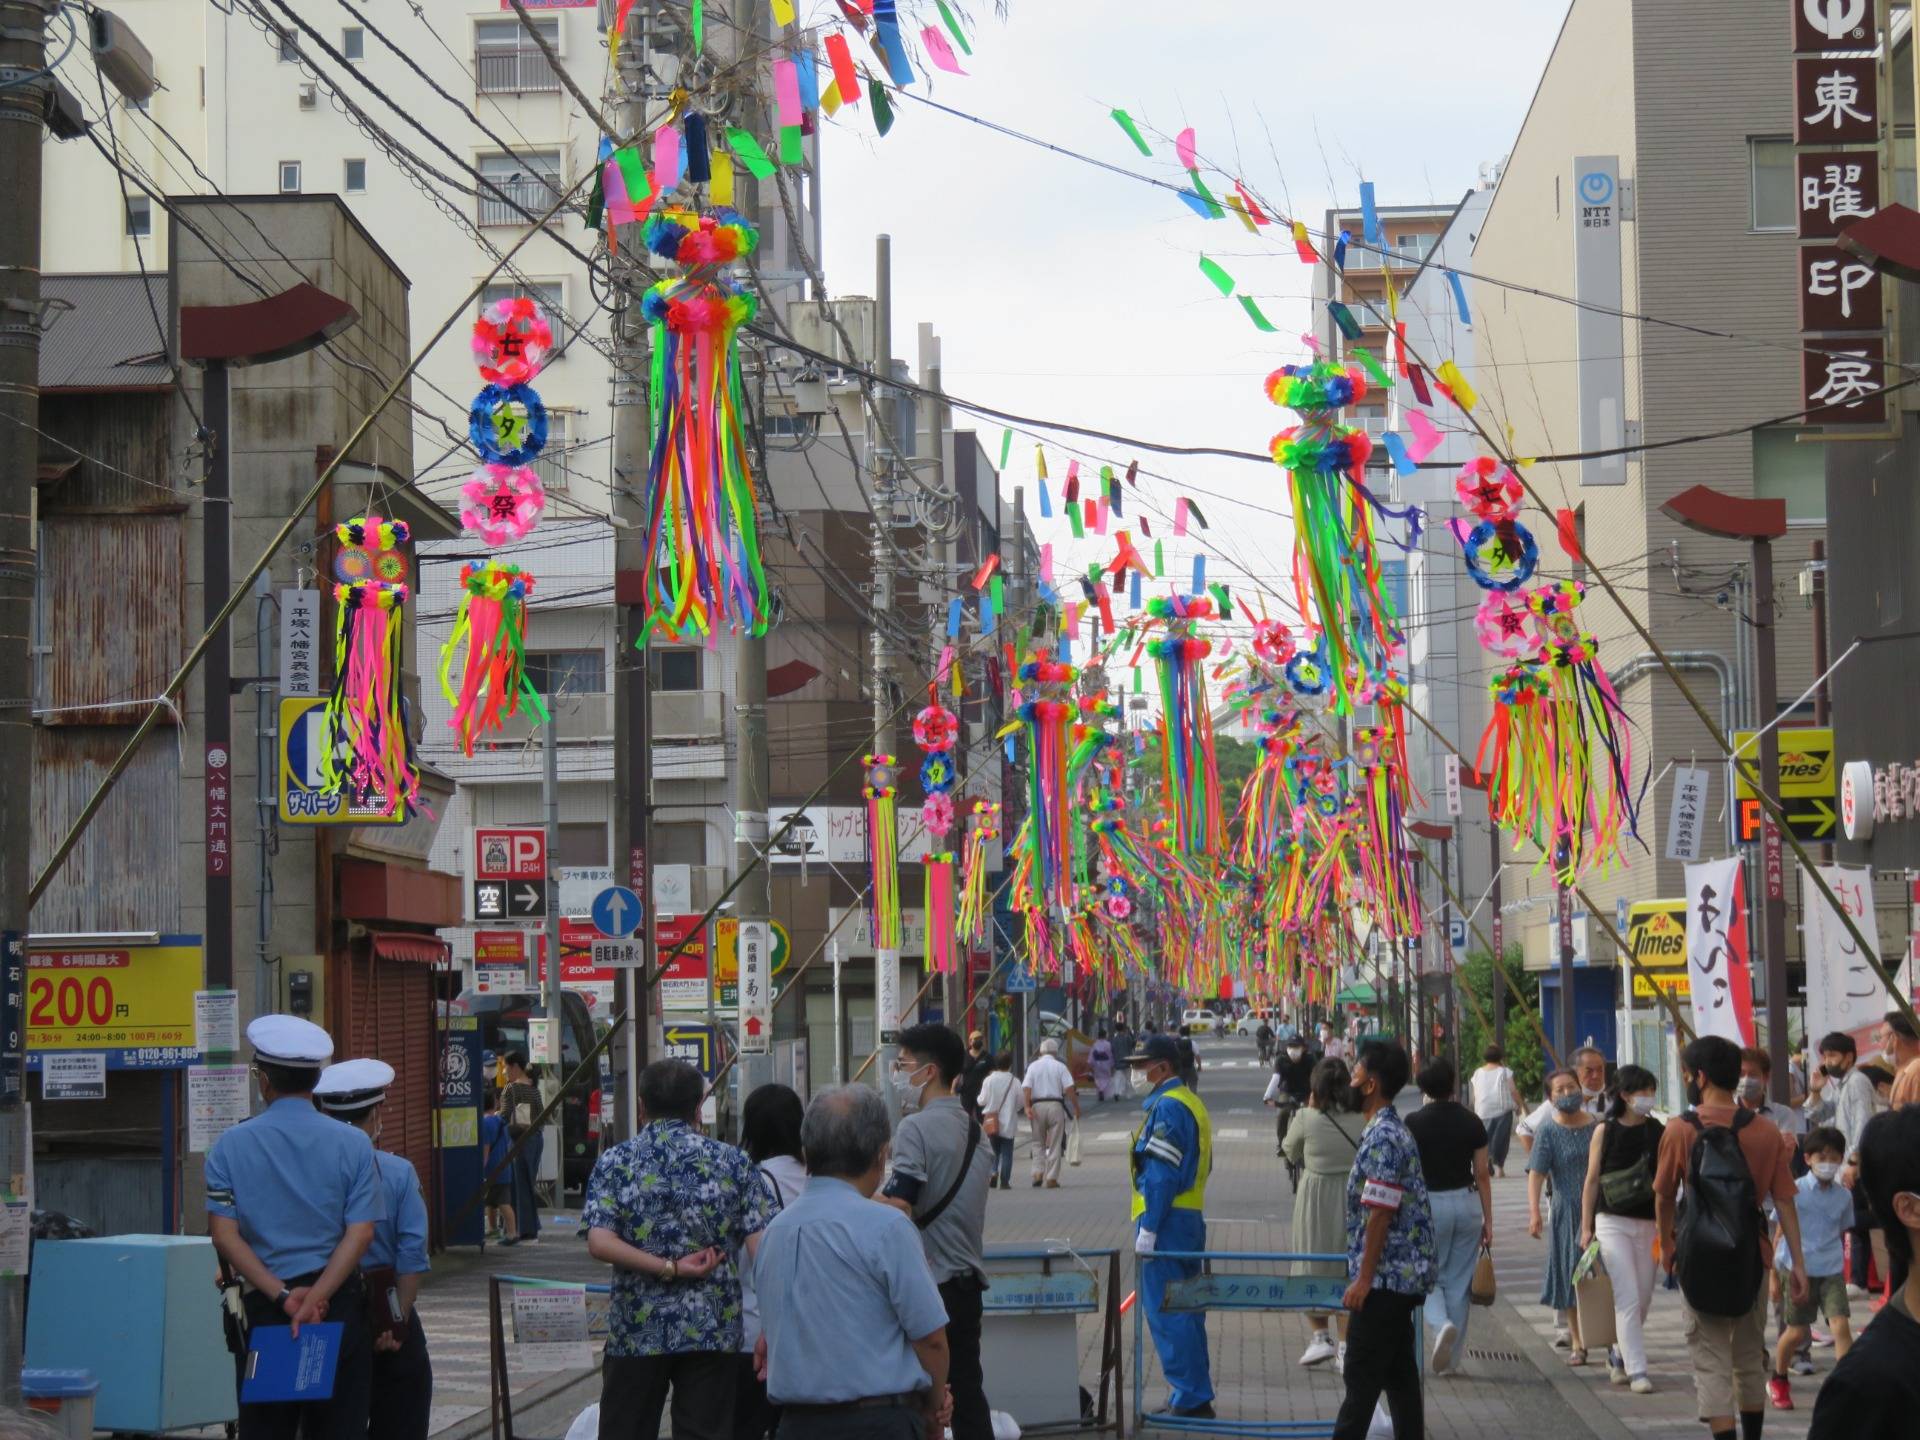 These are the usual Tanabata decorations that you might see in many areas in Japan at this time of year.